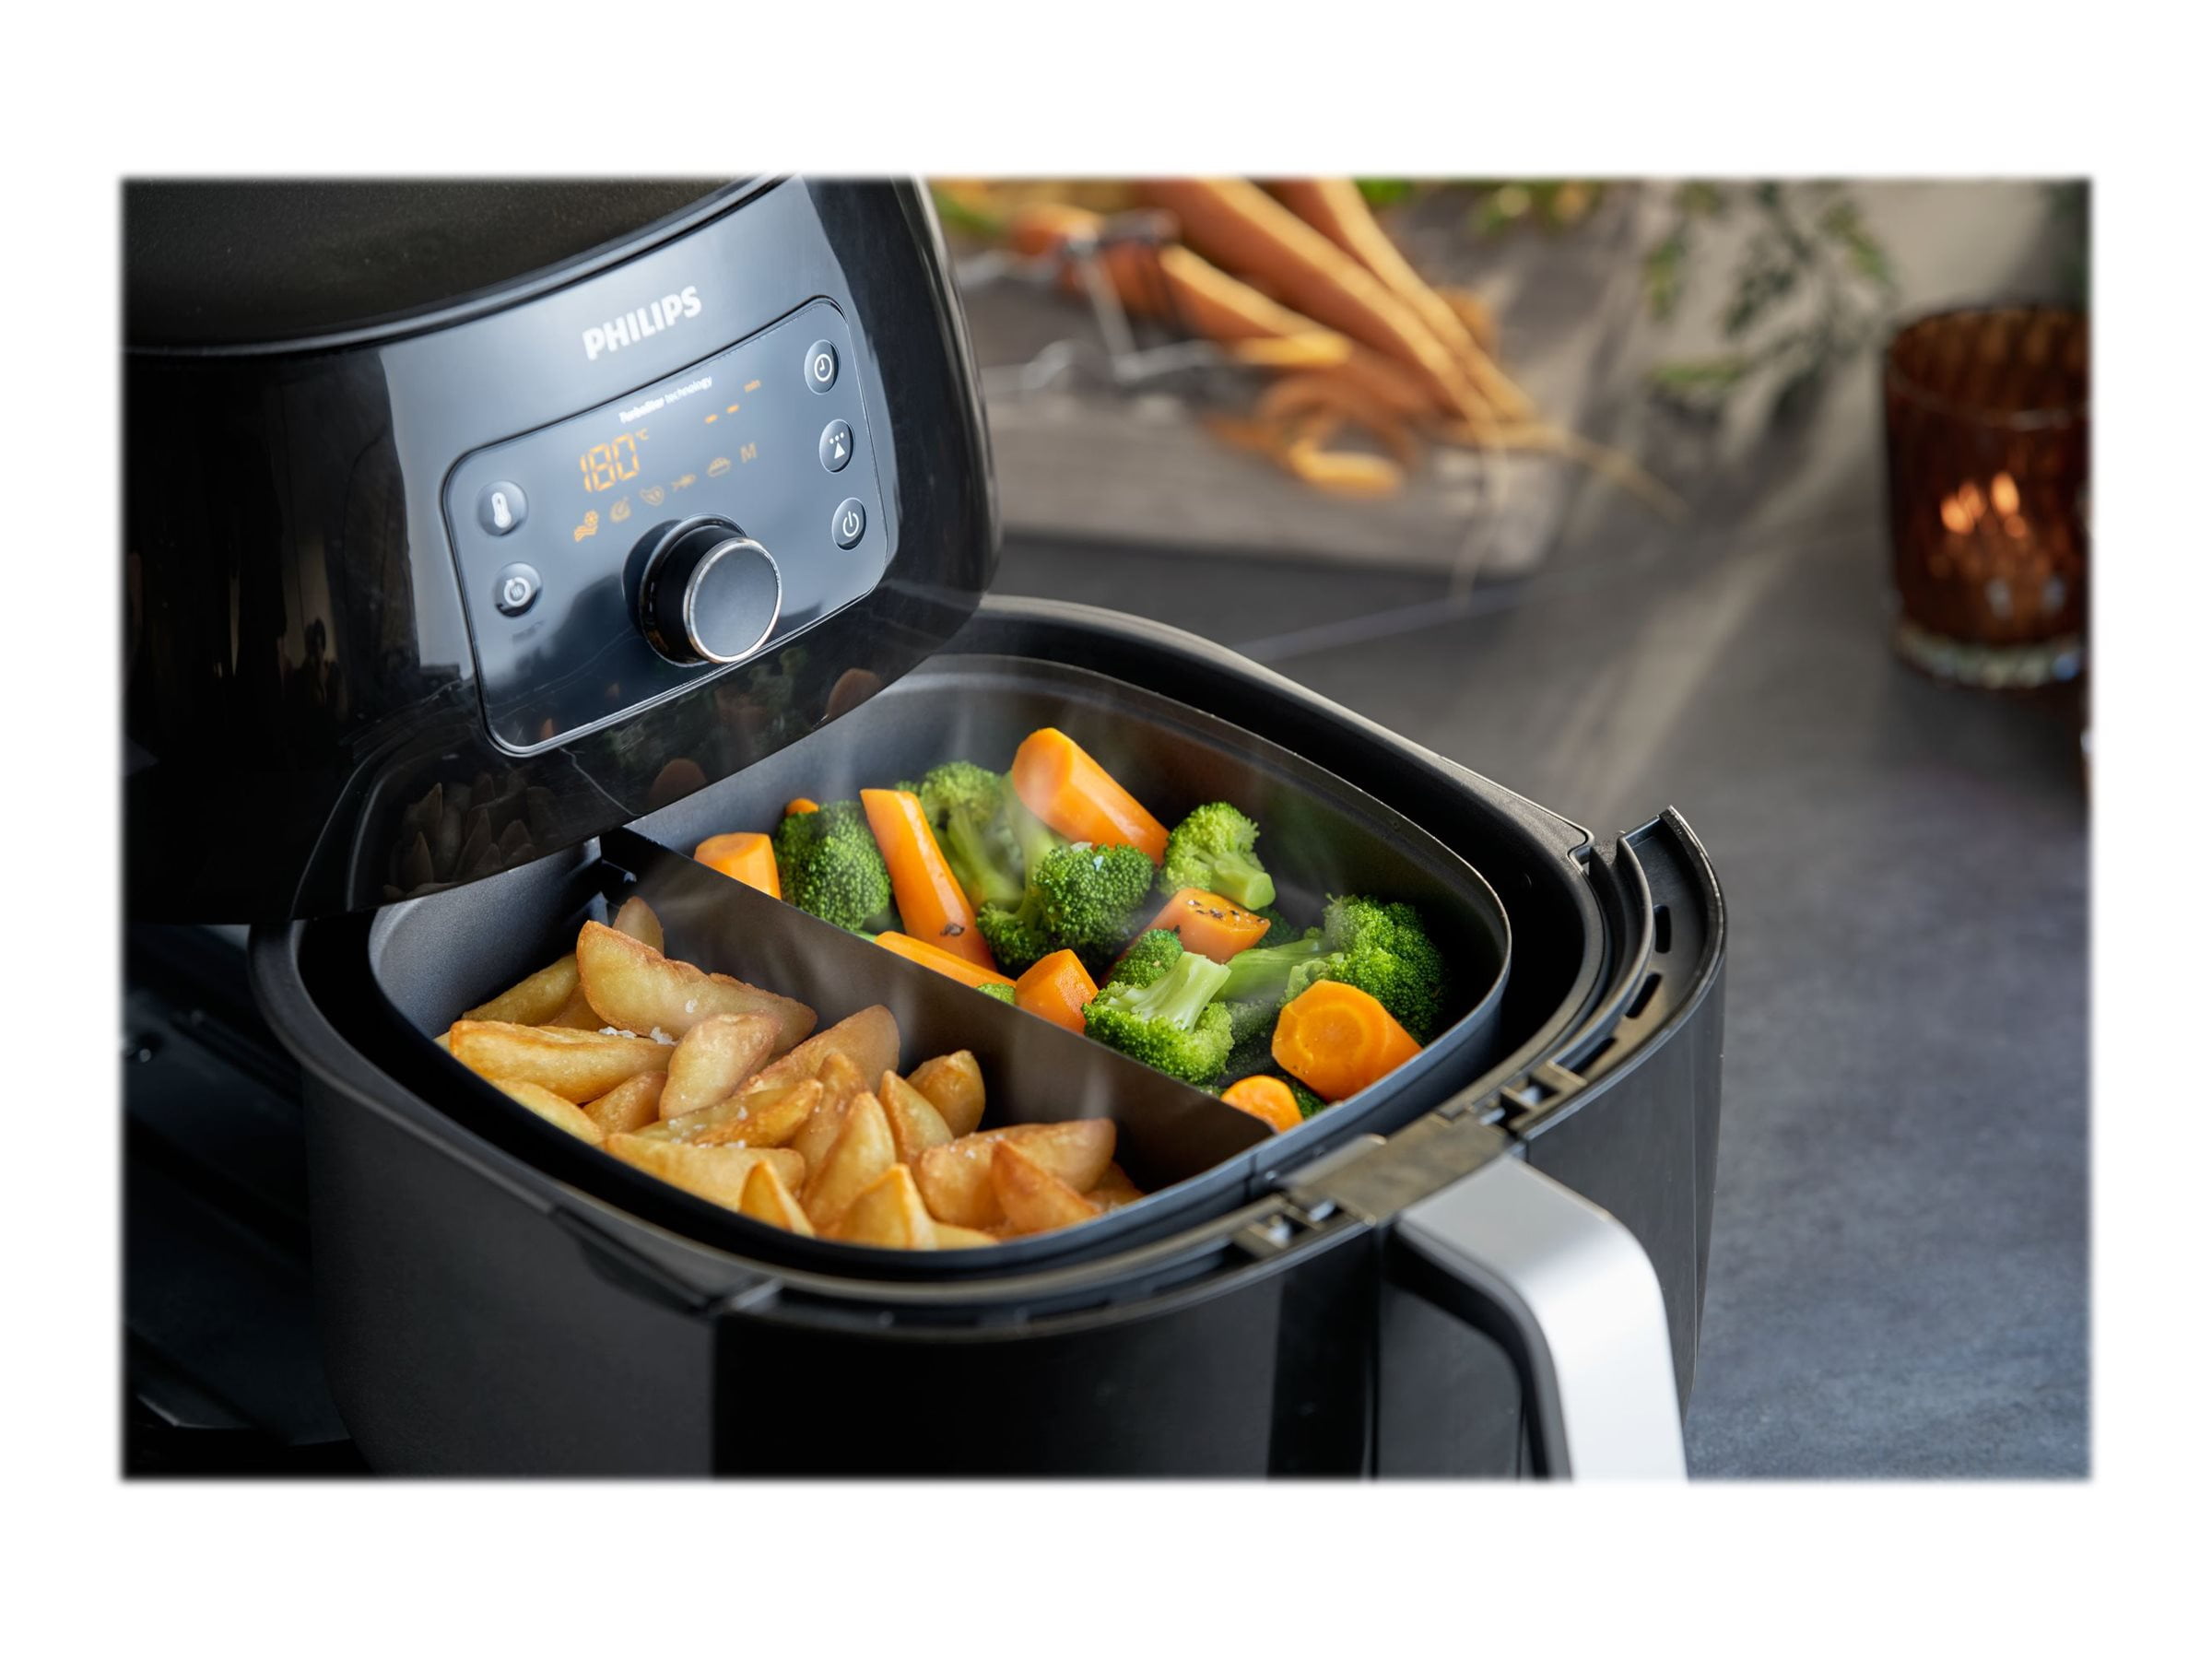 Philips Premium Airfryer XXL with Fat Removal Technology, Black, HD9630/98  & Kitchen Philips XXL Grill Master Accessory Kit for Twin Turbos Tar Model